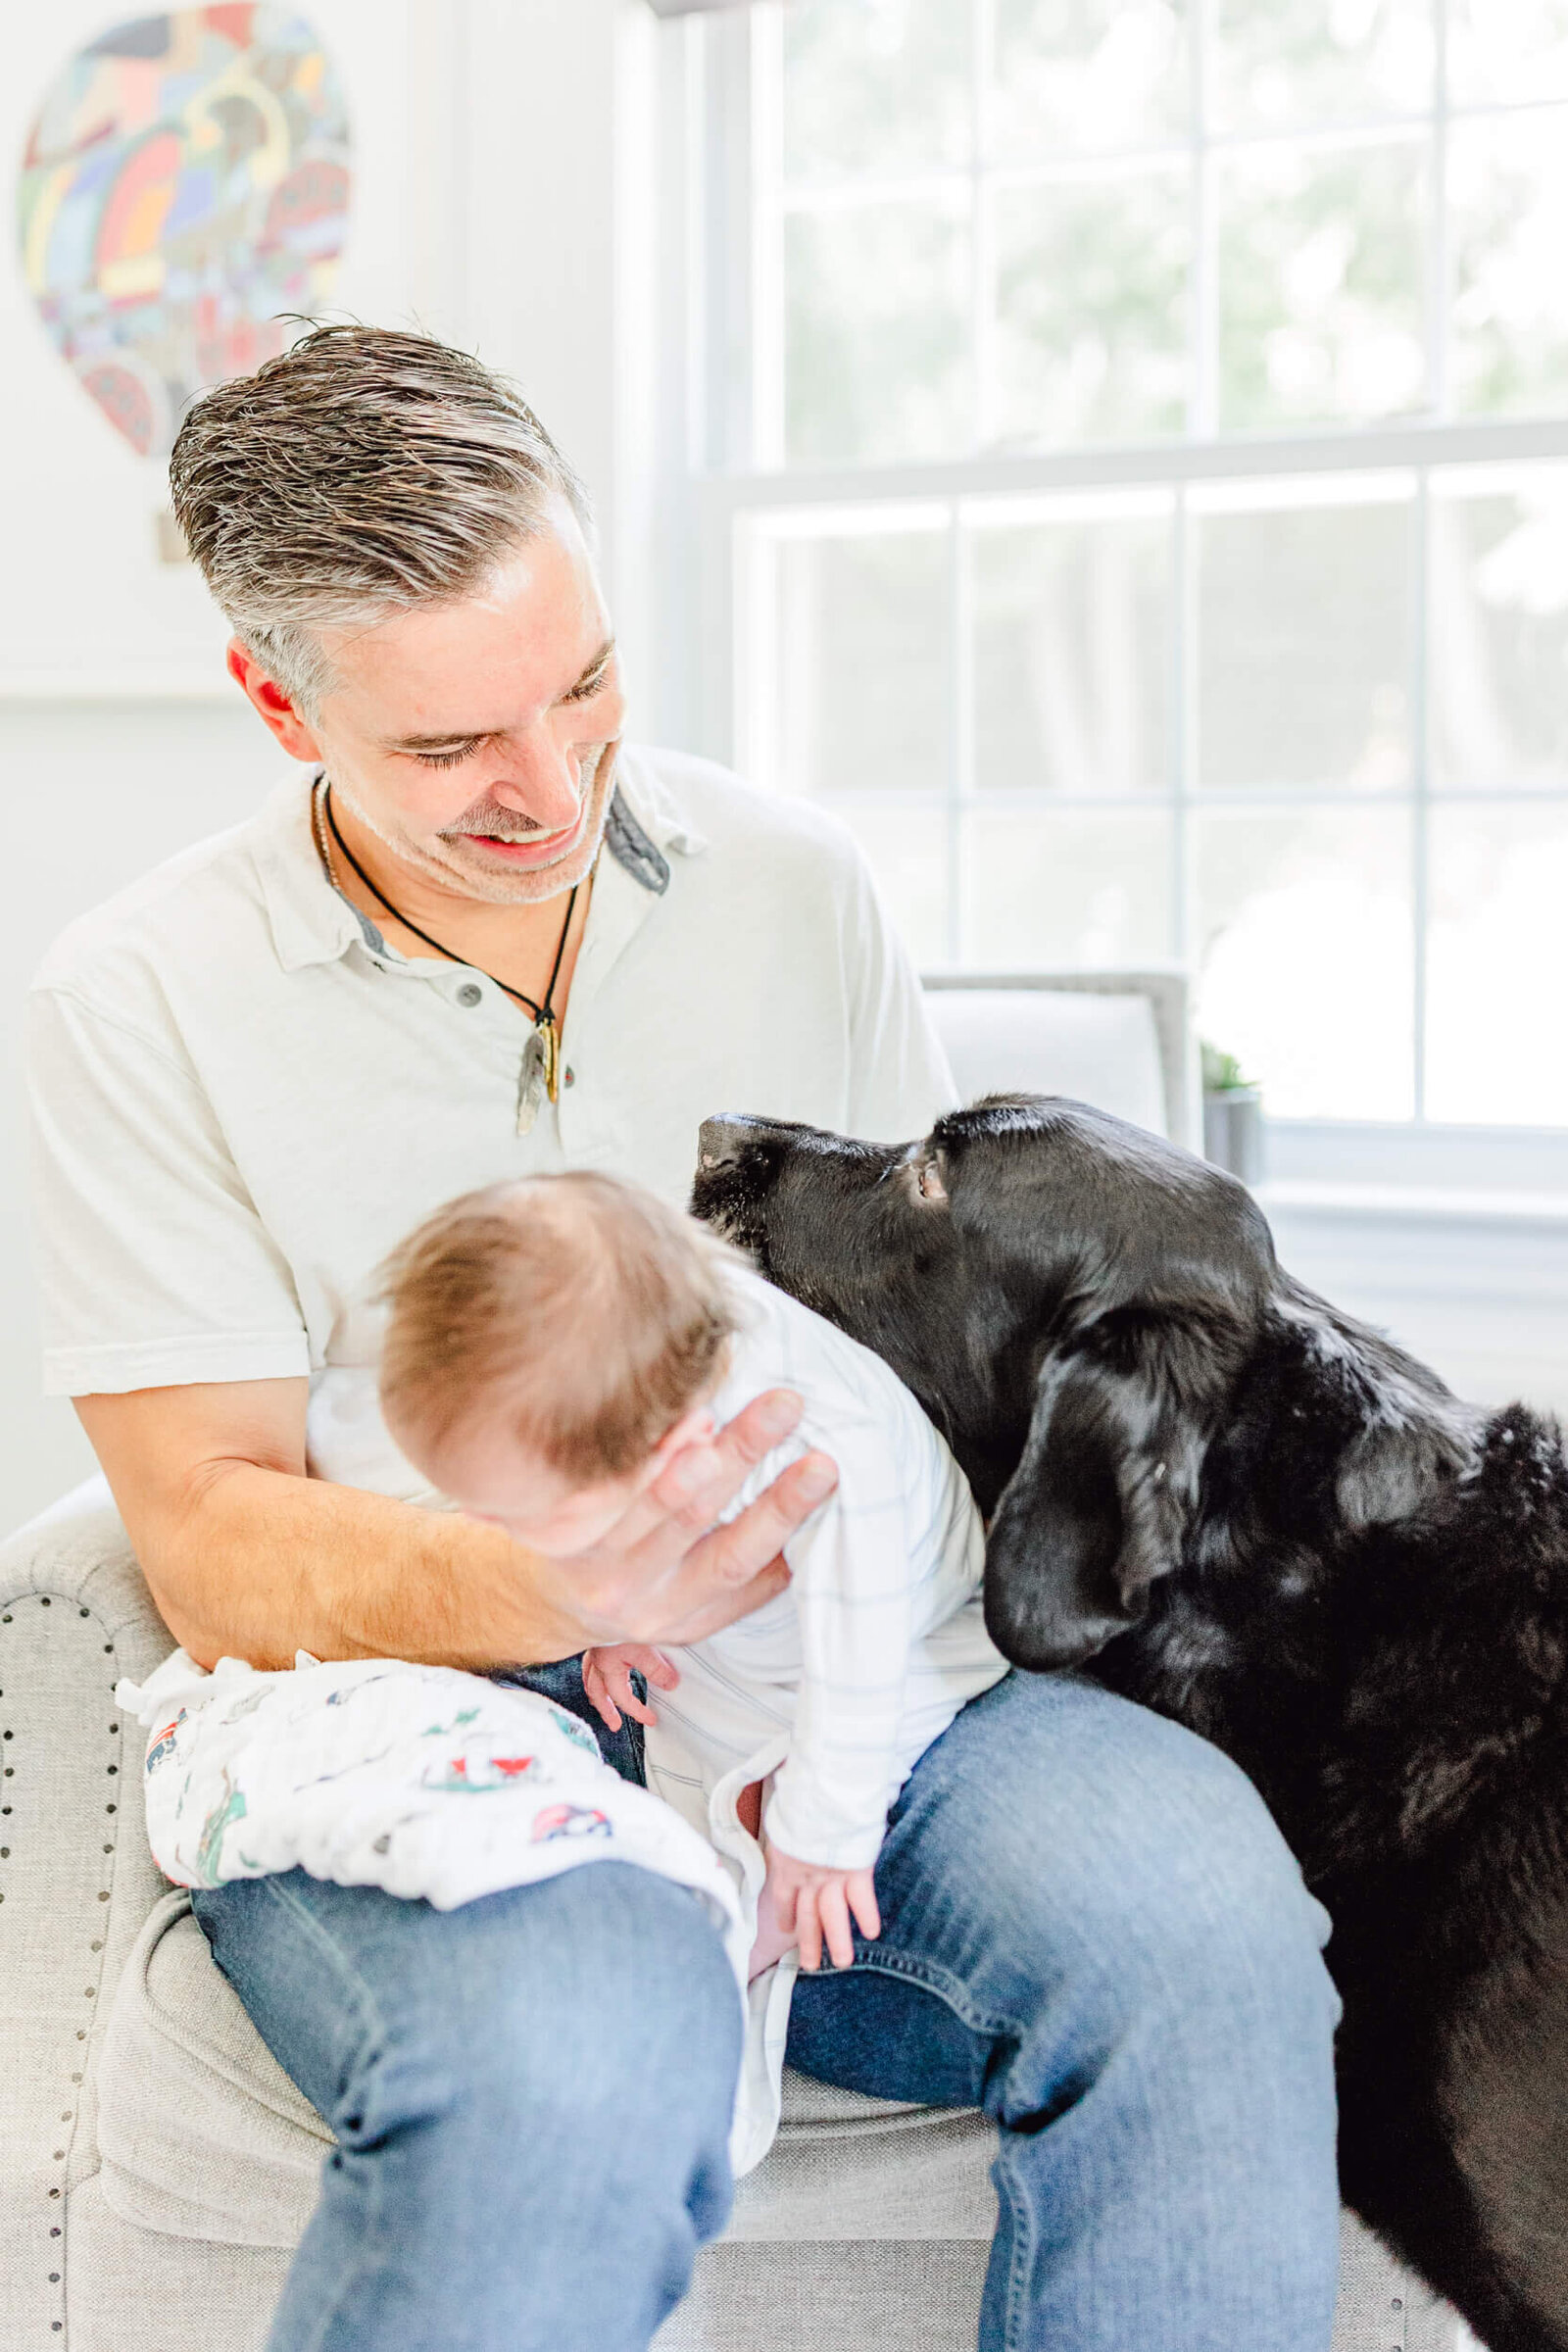 Dad burps his newborn in the nursery and laughs at a curious black lab